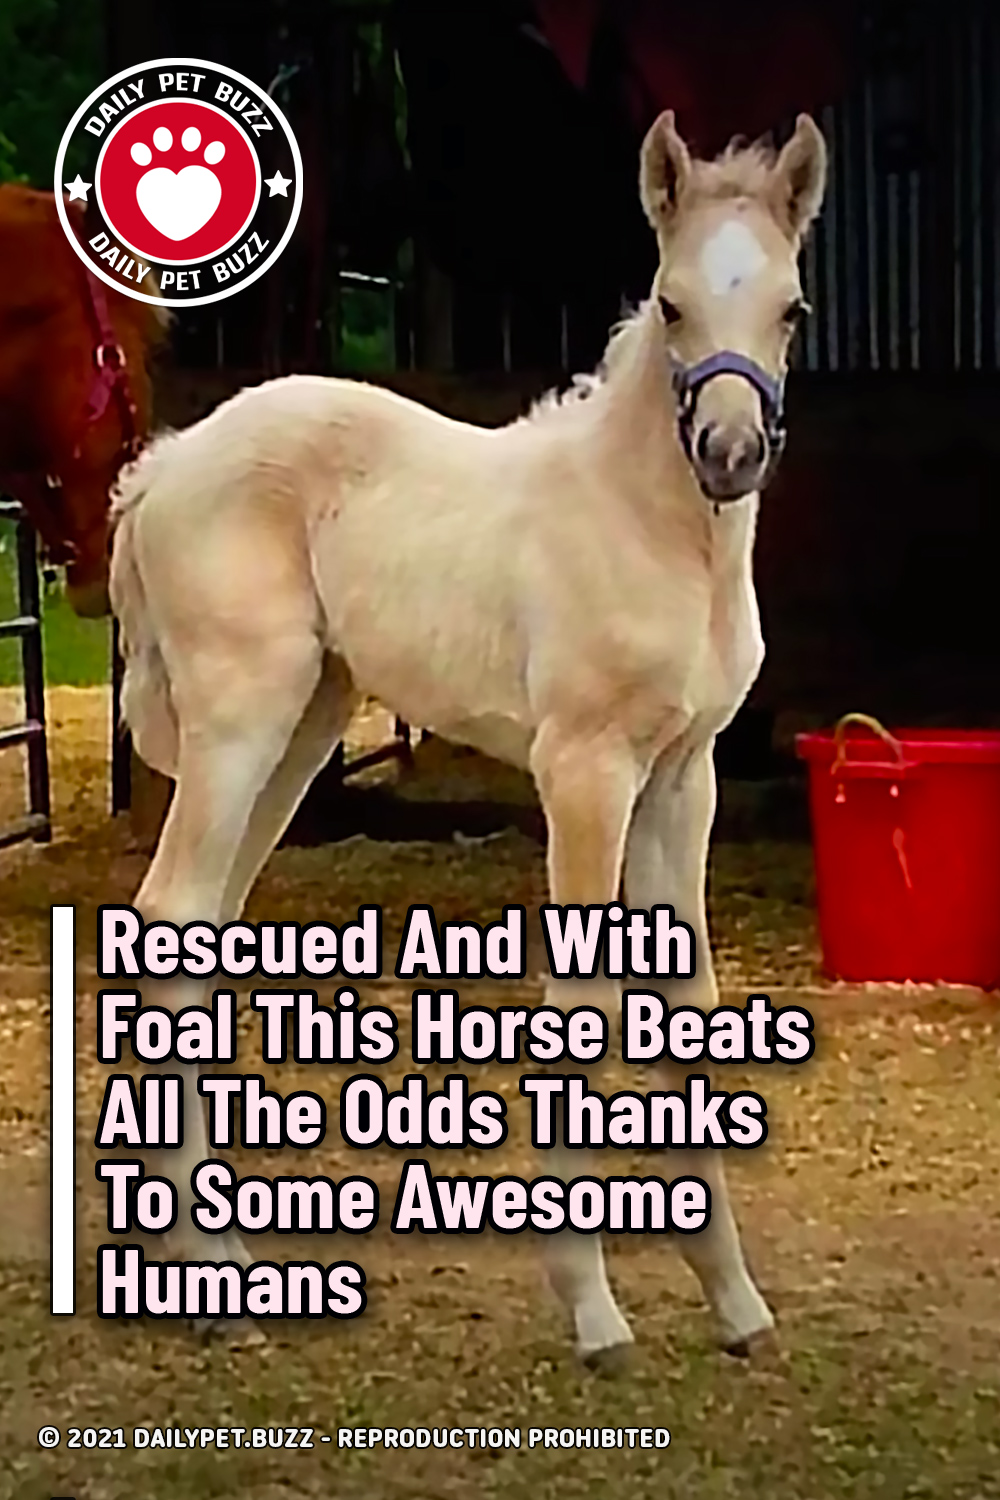 Rescued And With Foal This Horse Beats All The Odds Thanks To Some Awesome Humans